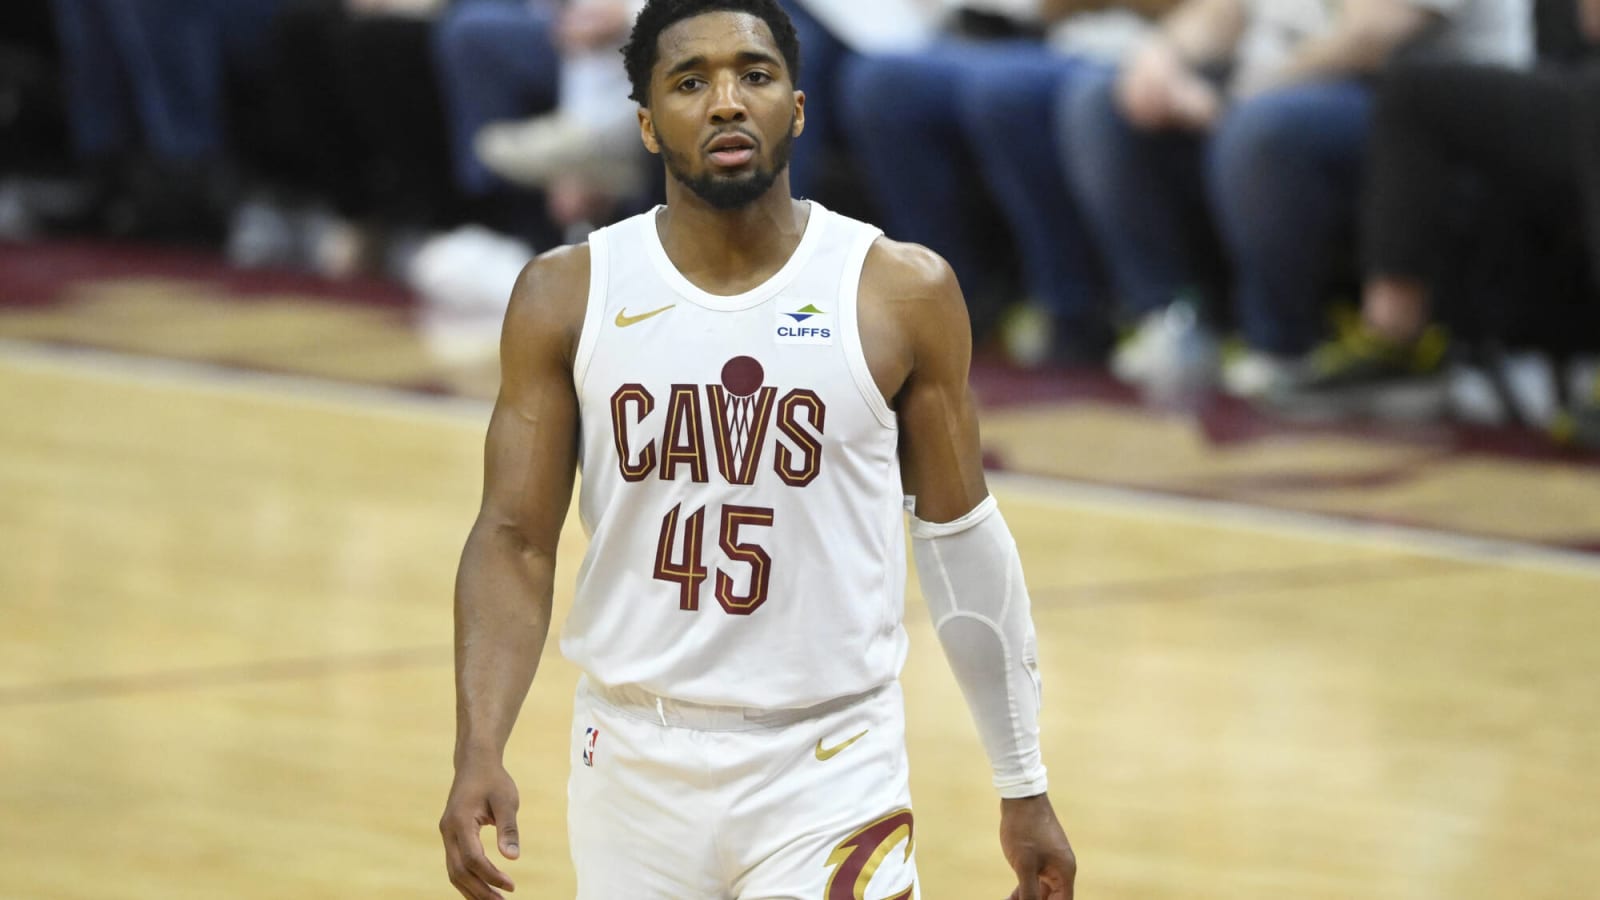 Report: Cavaliers’ Donovan Mitchell Is Lakers’ No. 1 Trade Target